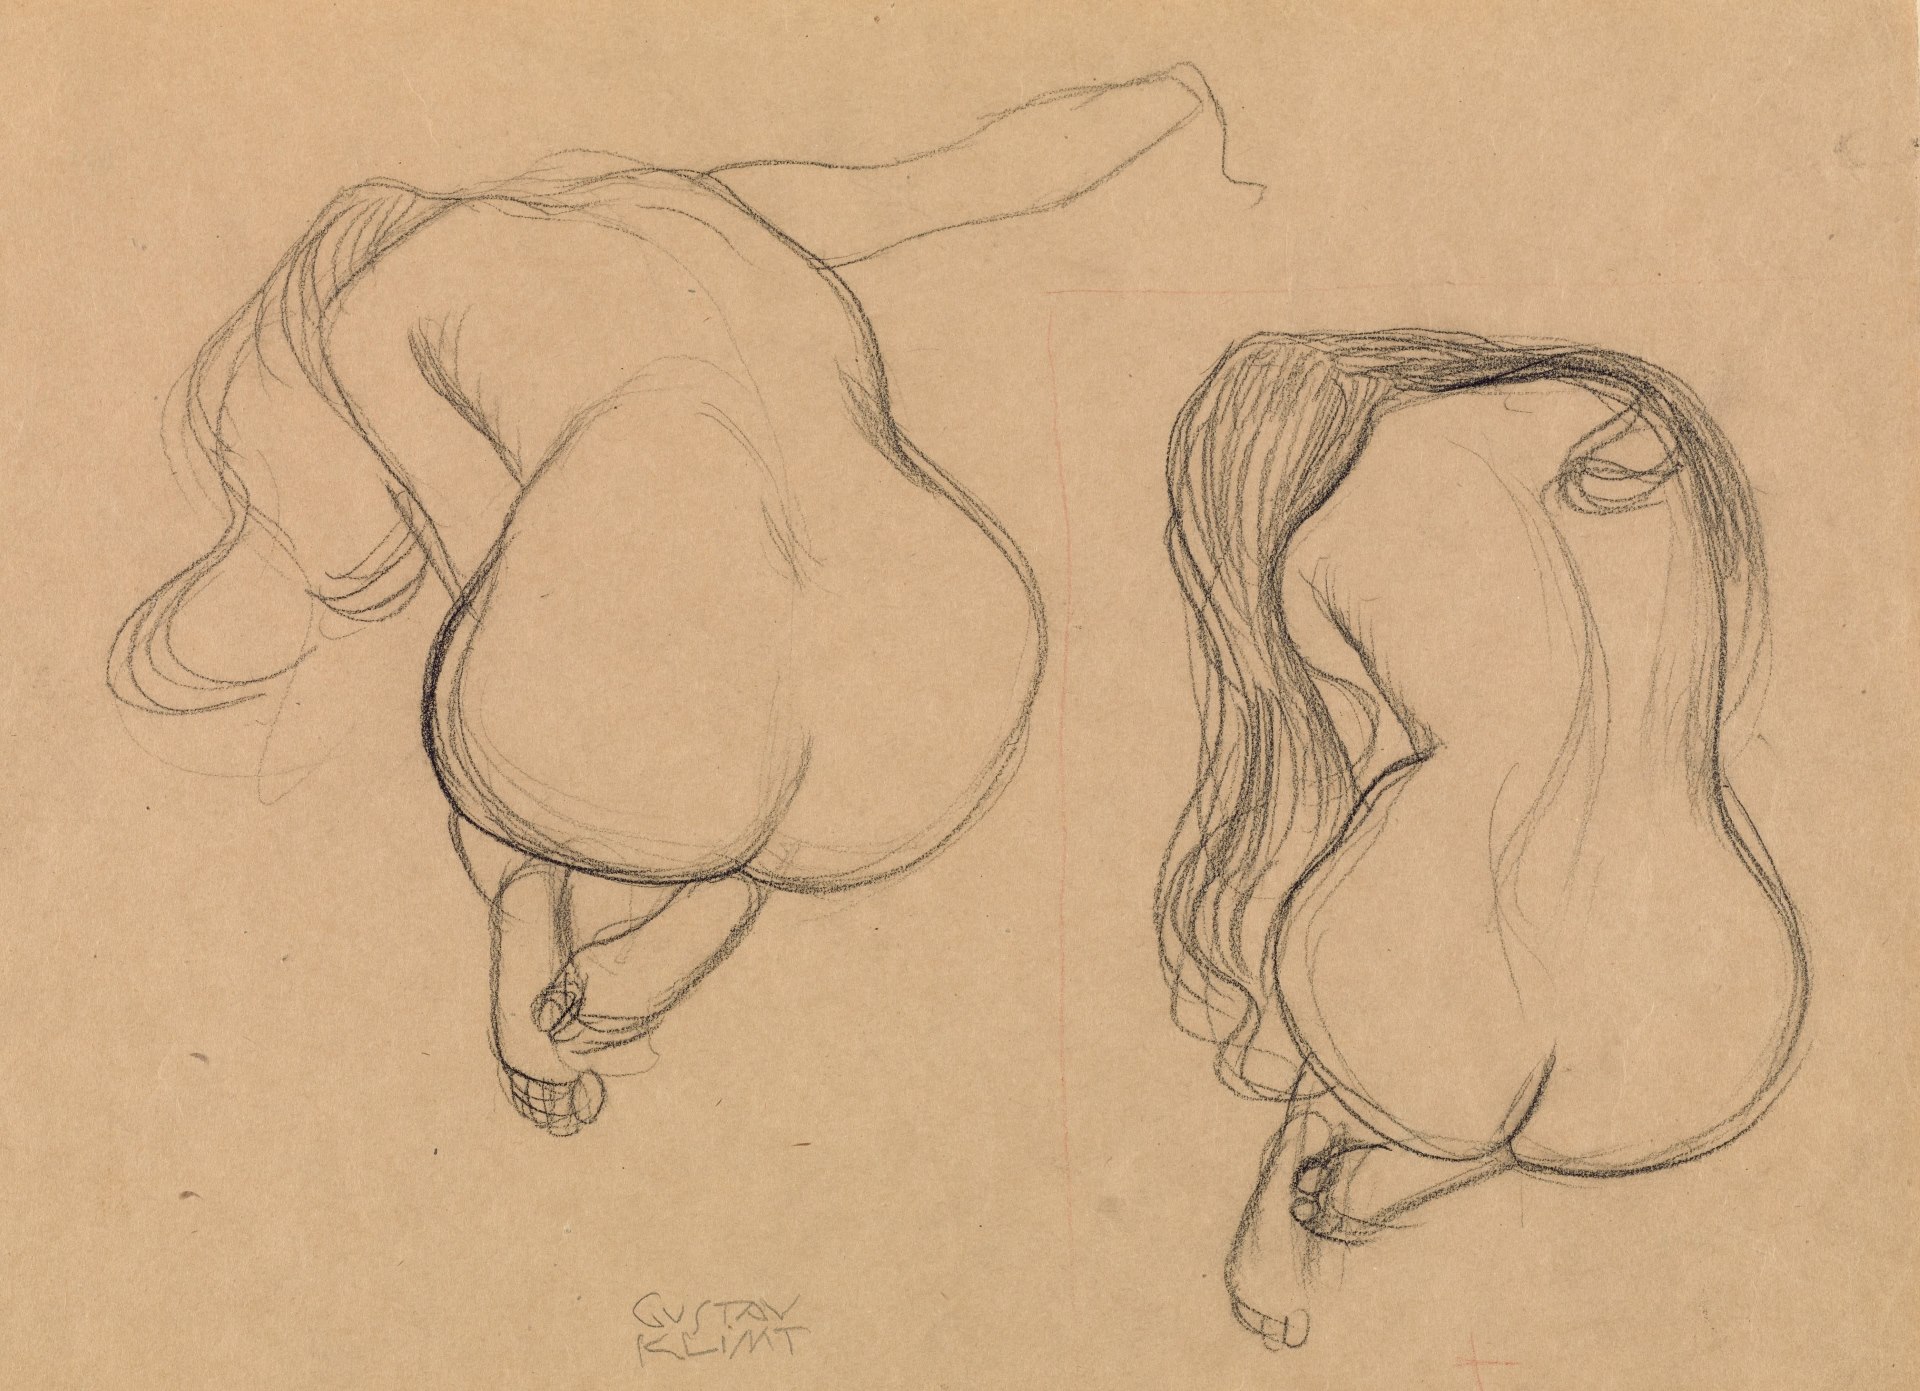 Gustav Klimt ‘Two Studies of a Seated Nude with Long Hair’, circa 1901-1902